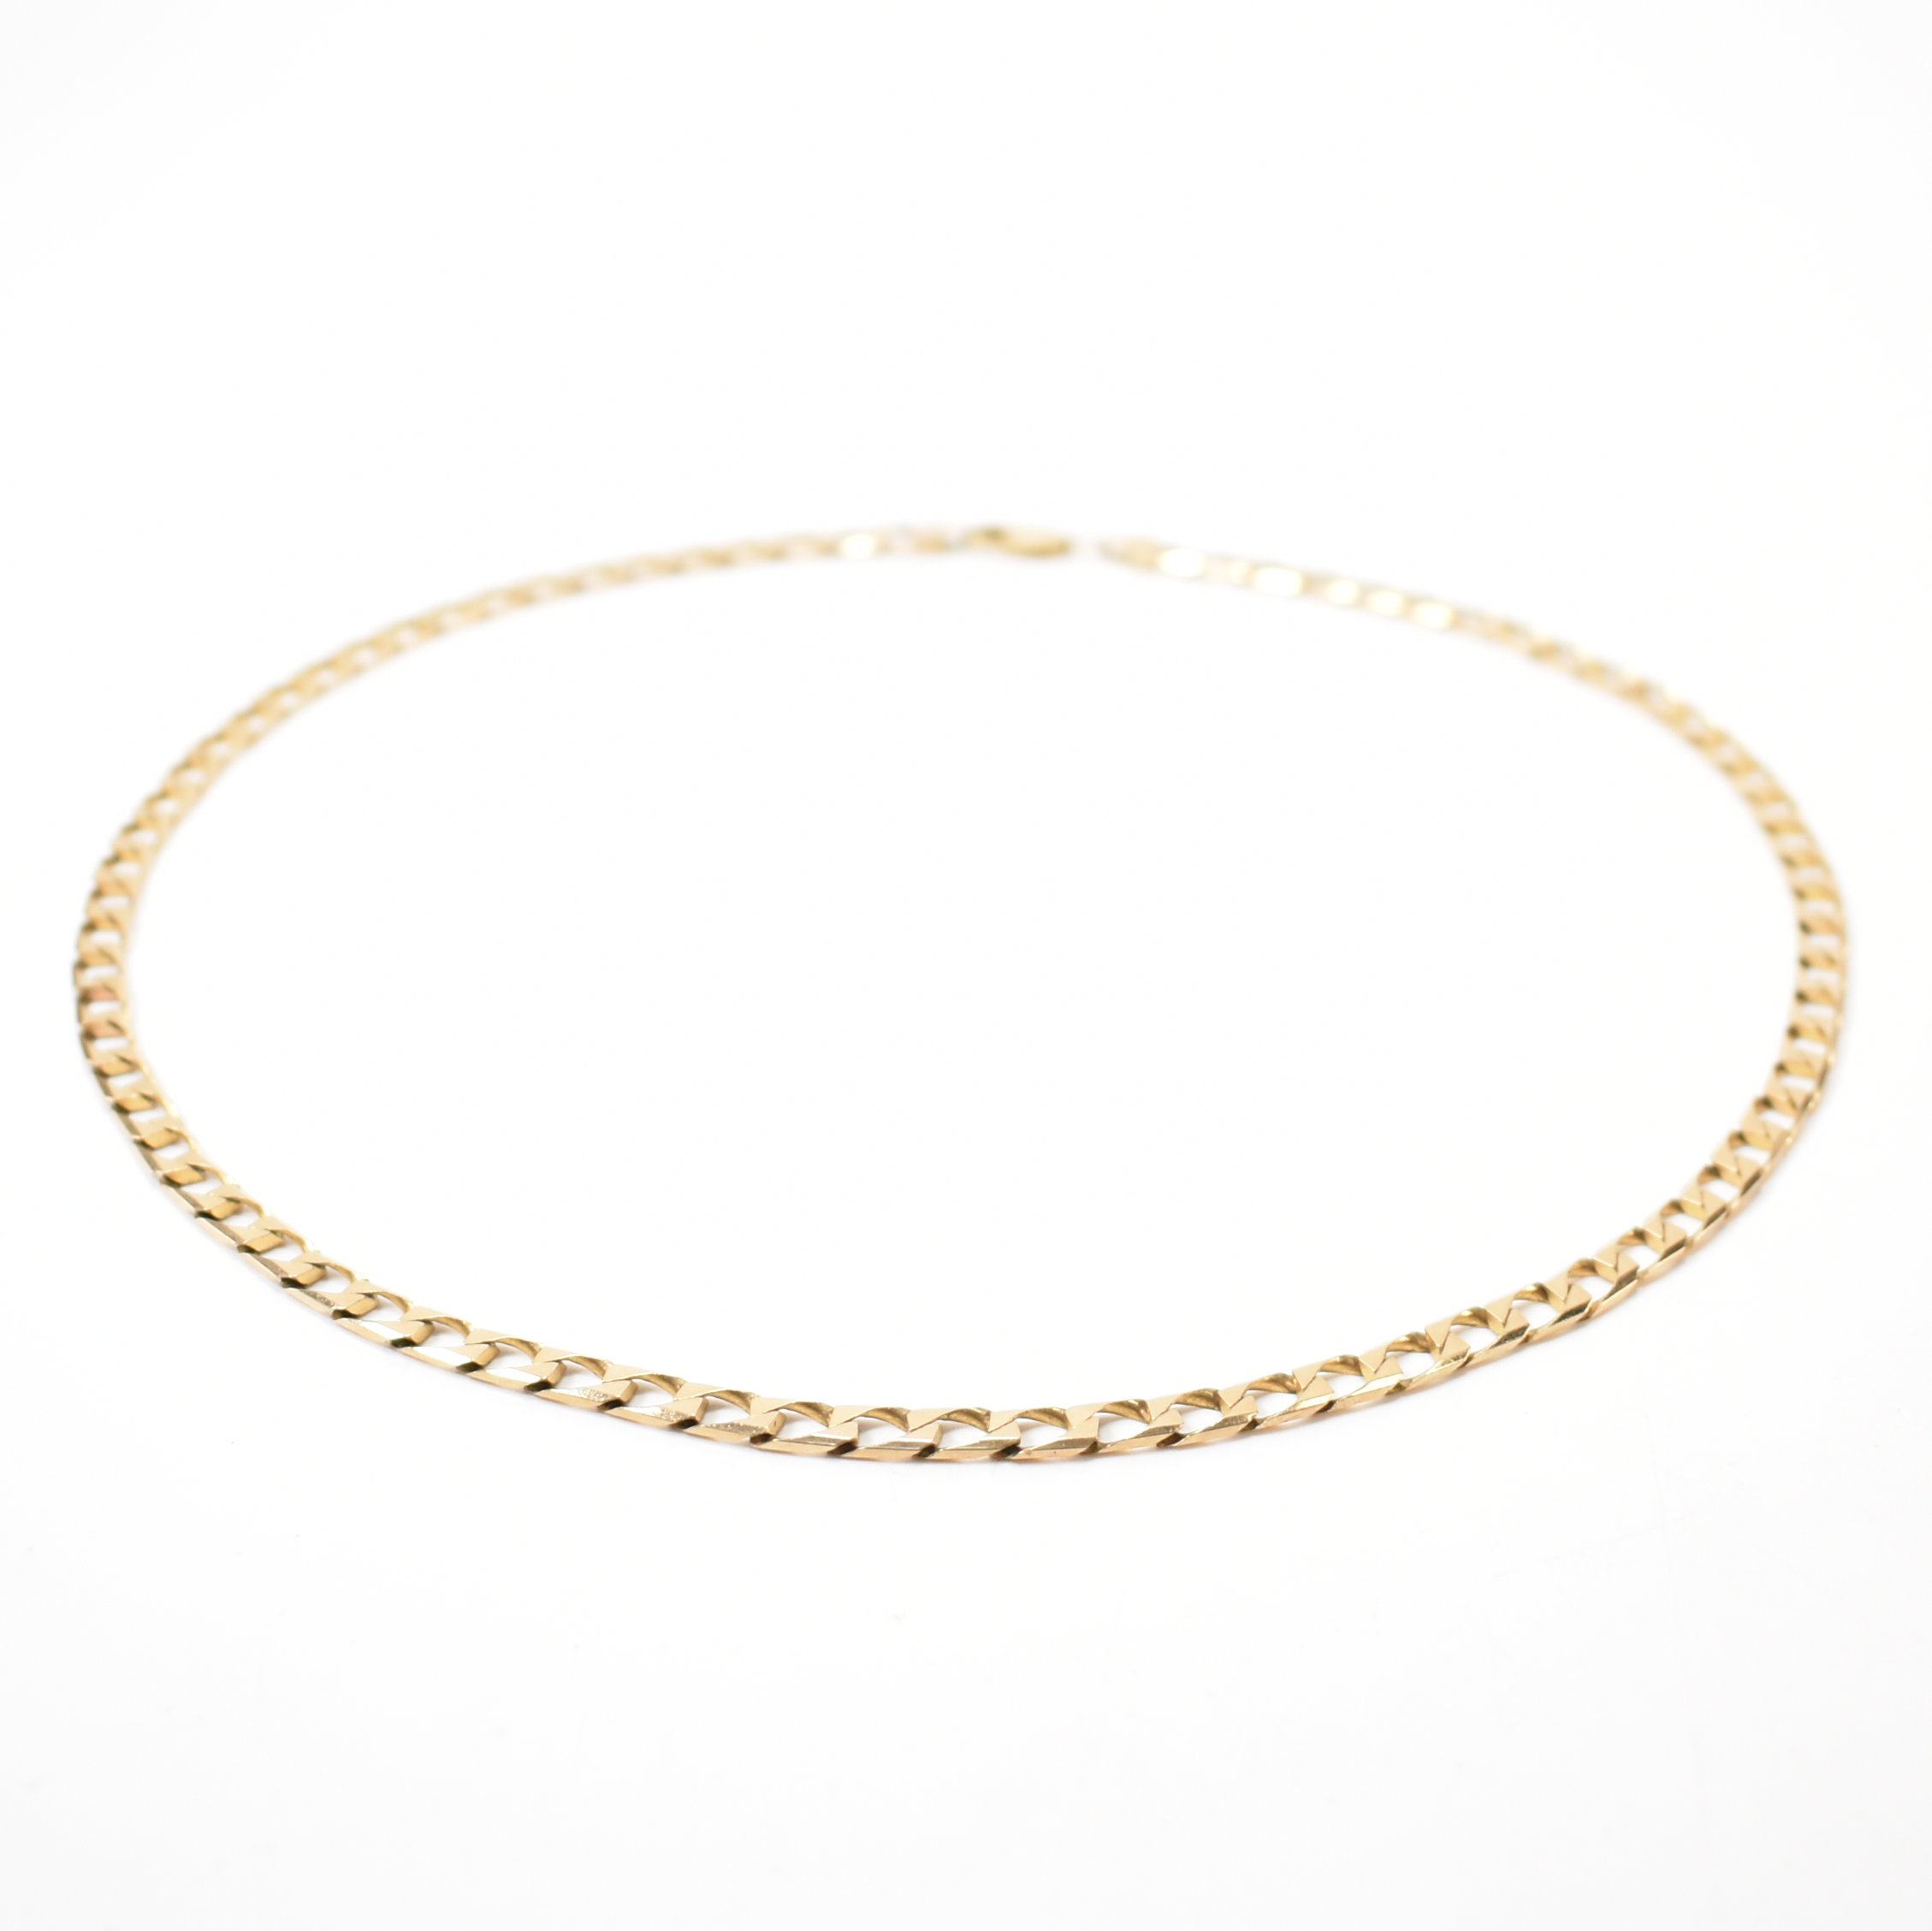 HALLMARKED 9CT GOLD FLAT CURB LINK NECKLACE CHAIN